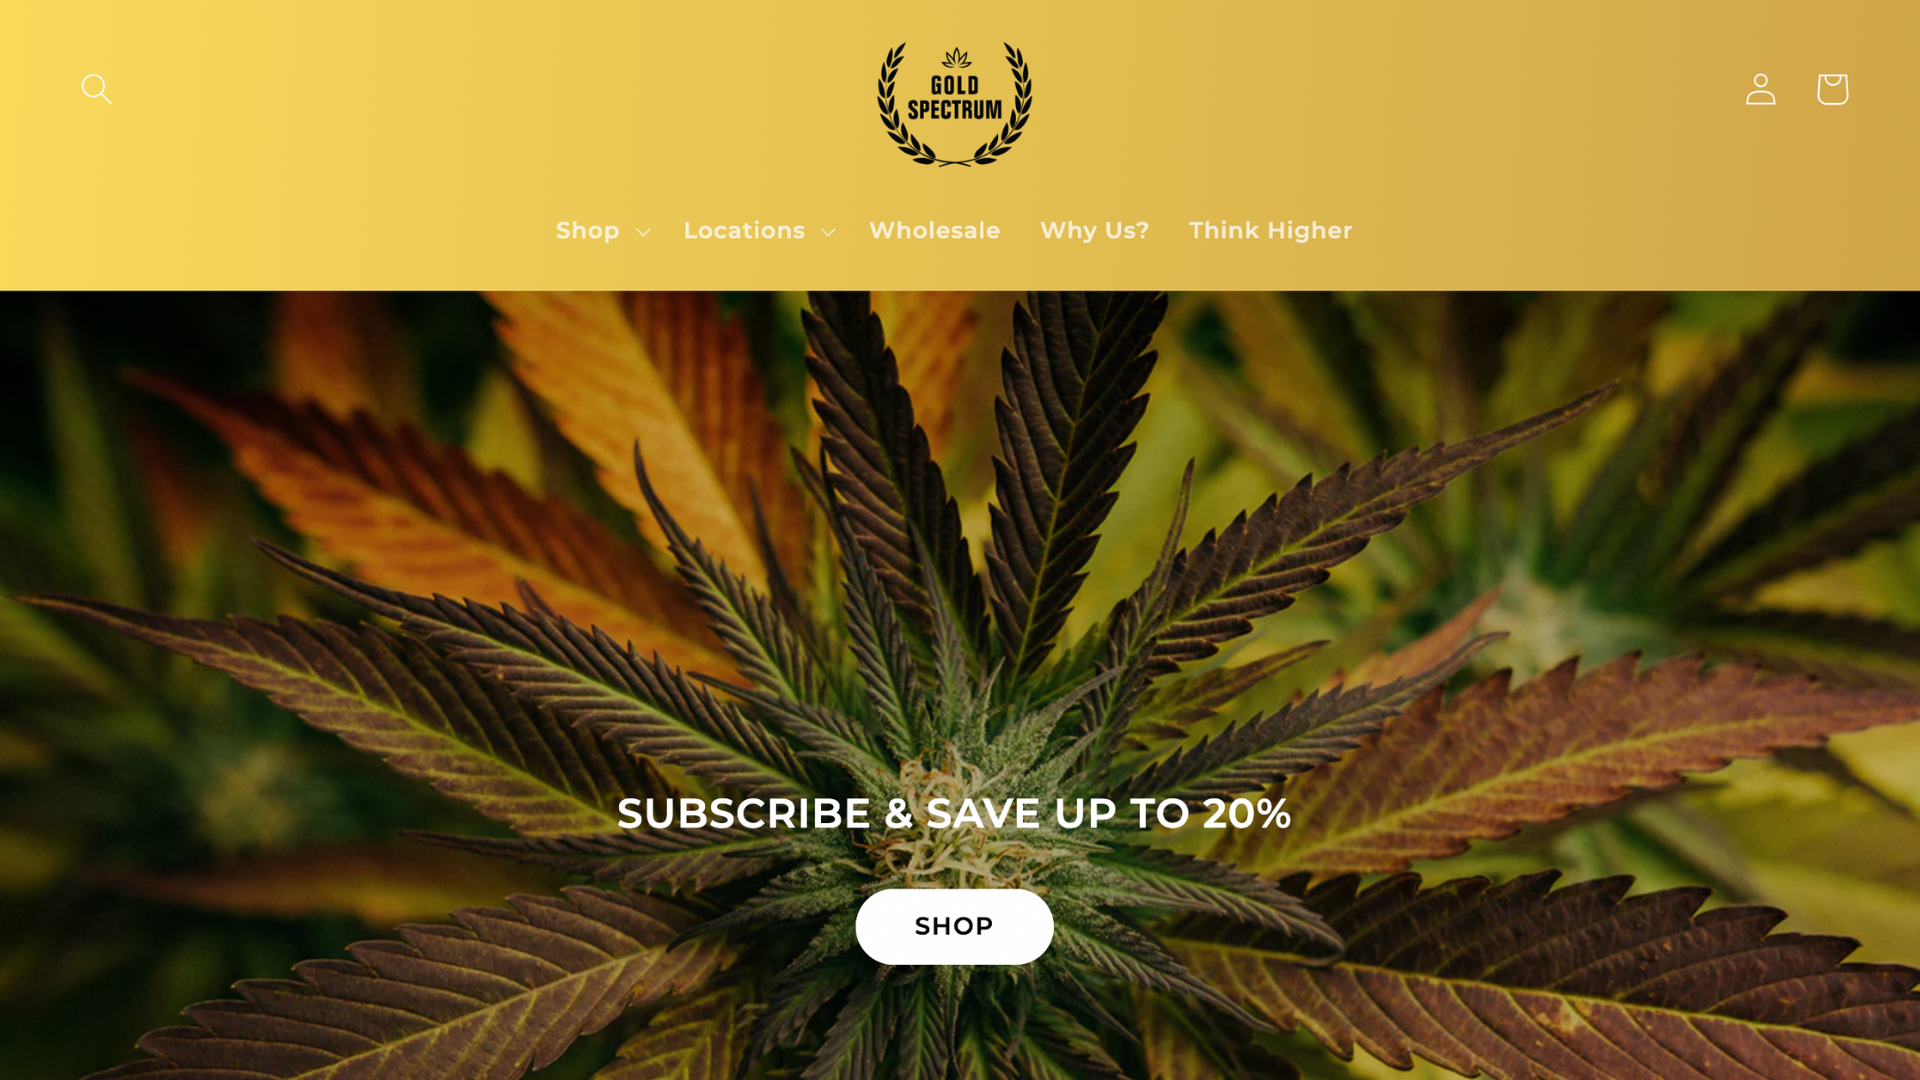 Search Engine optimisation for Cannabis and ecommerce